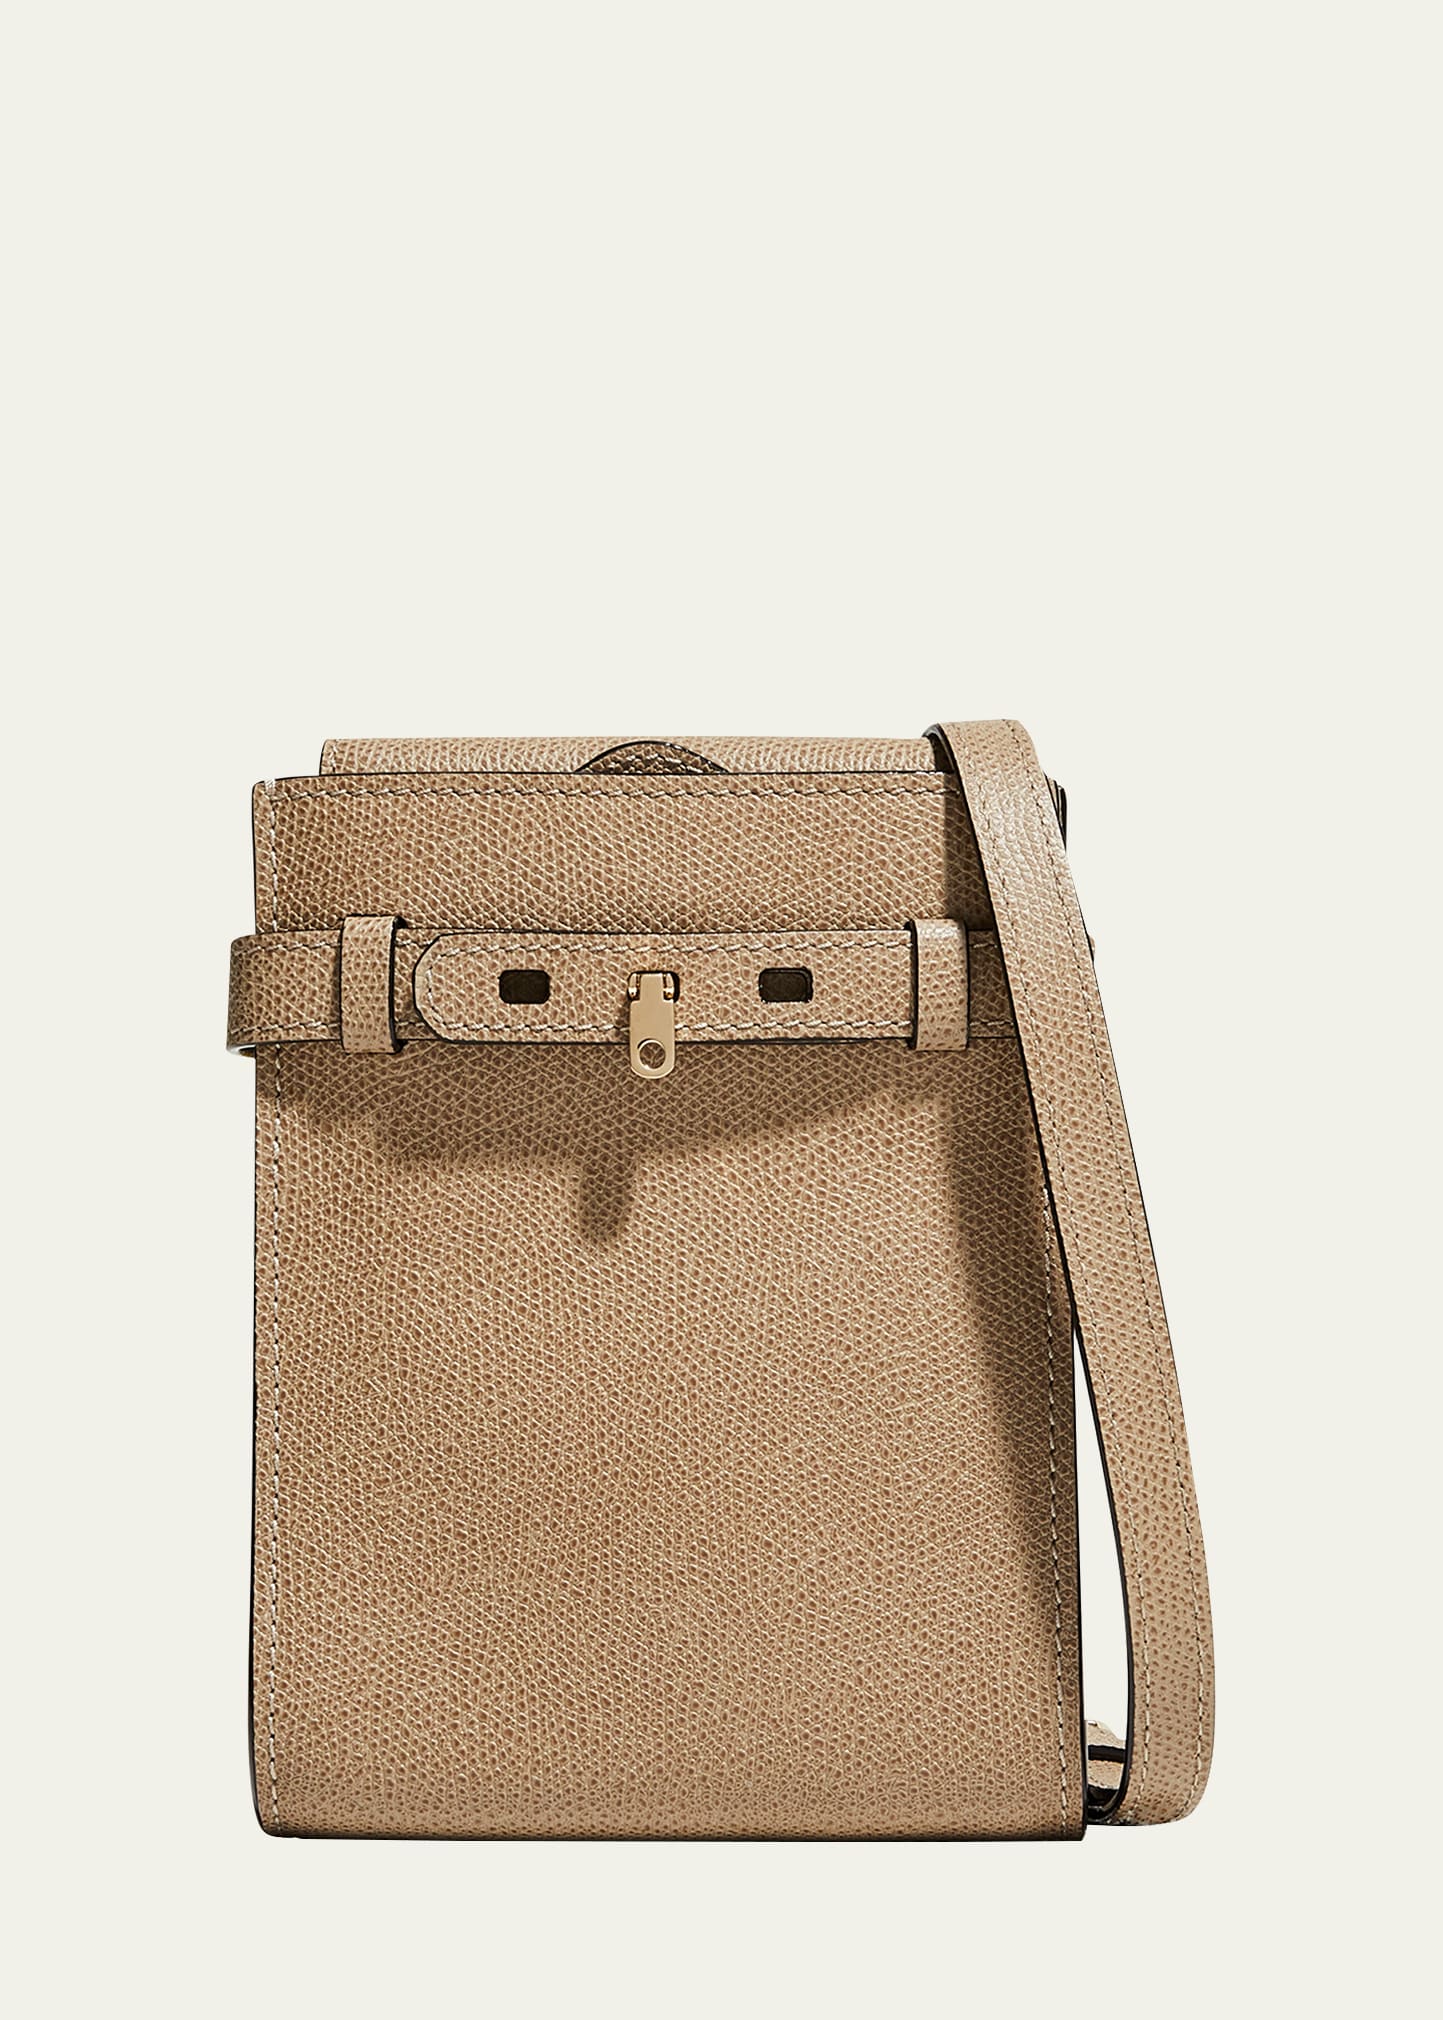 Valextra Bicolor Slim Leather Crossbody Bag In Mo Oyster